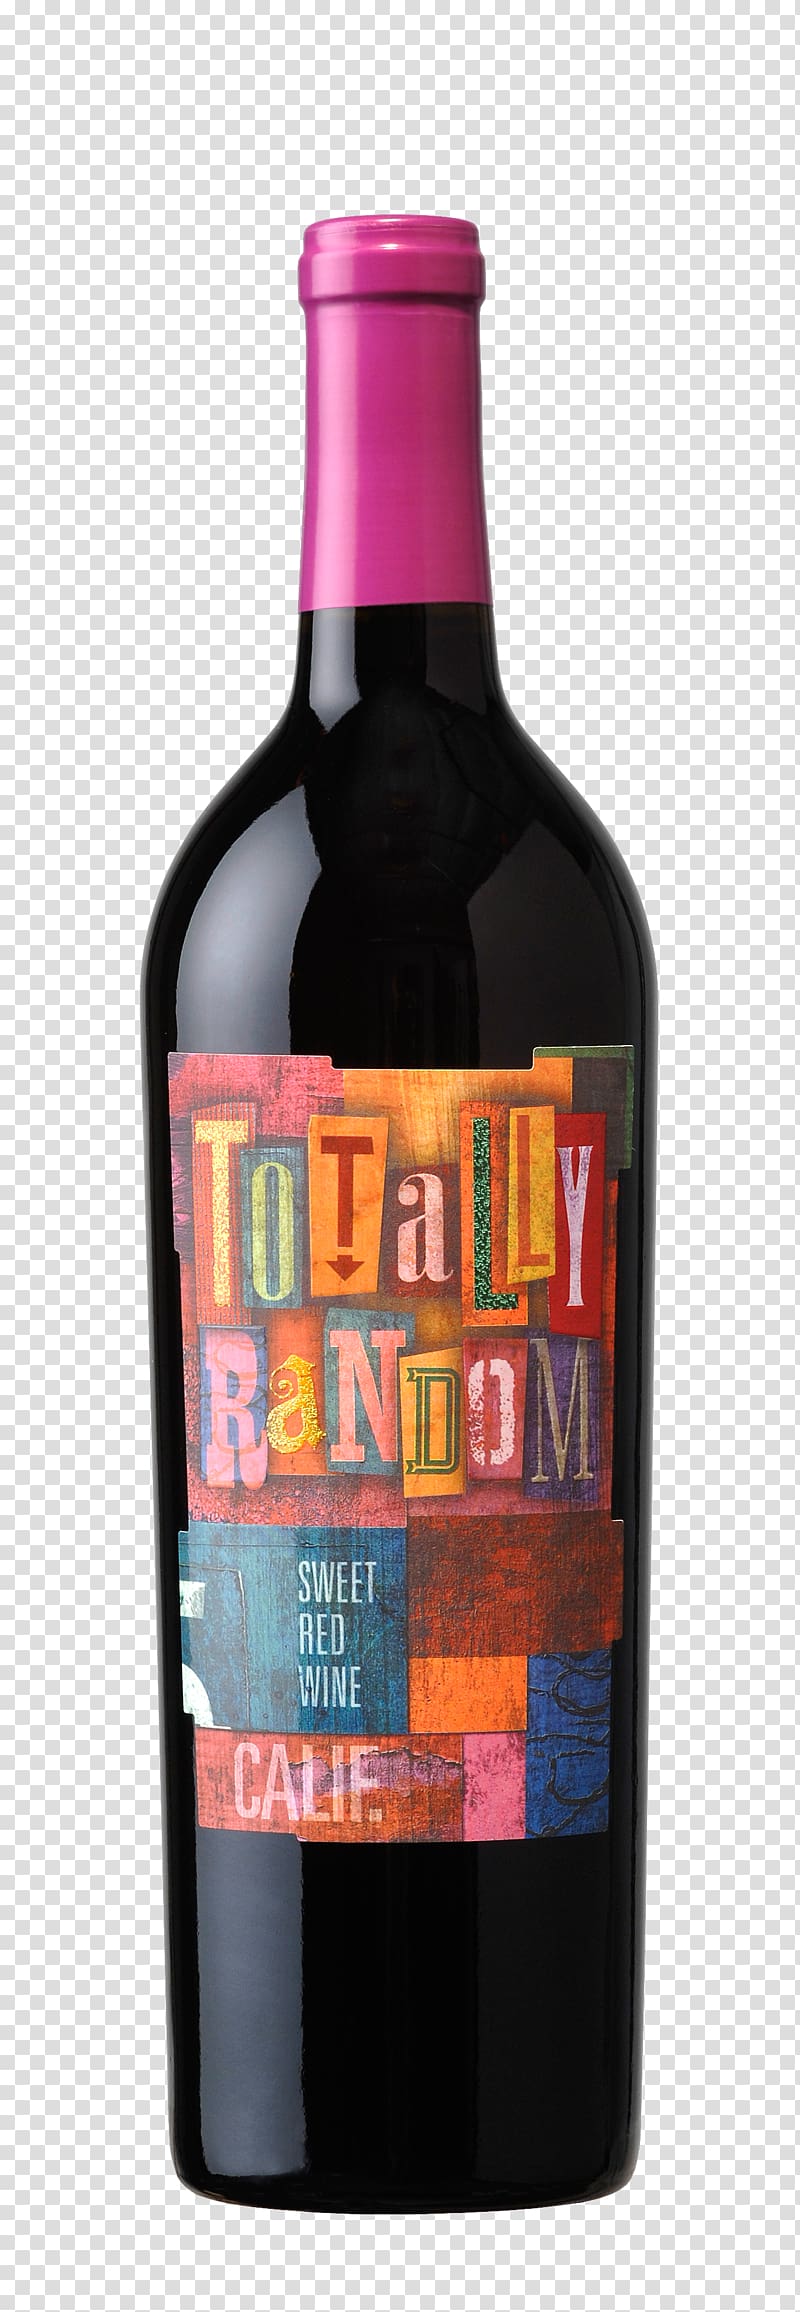 Red Wine Shiraz Malbec Muscat, Bottle , free of bottle transparent background PNG clipart